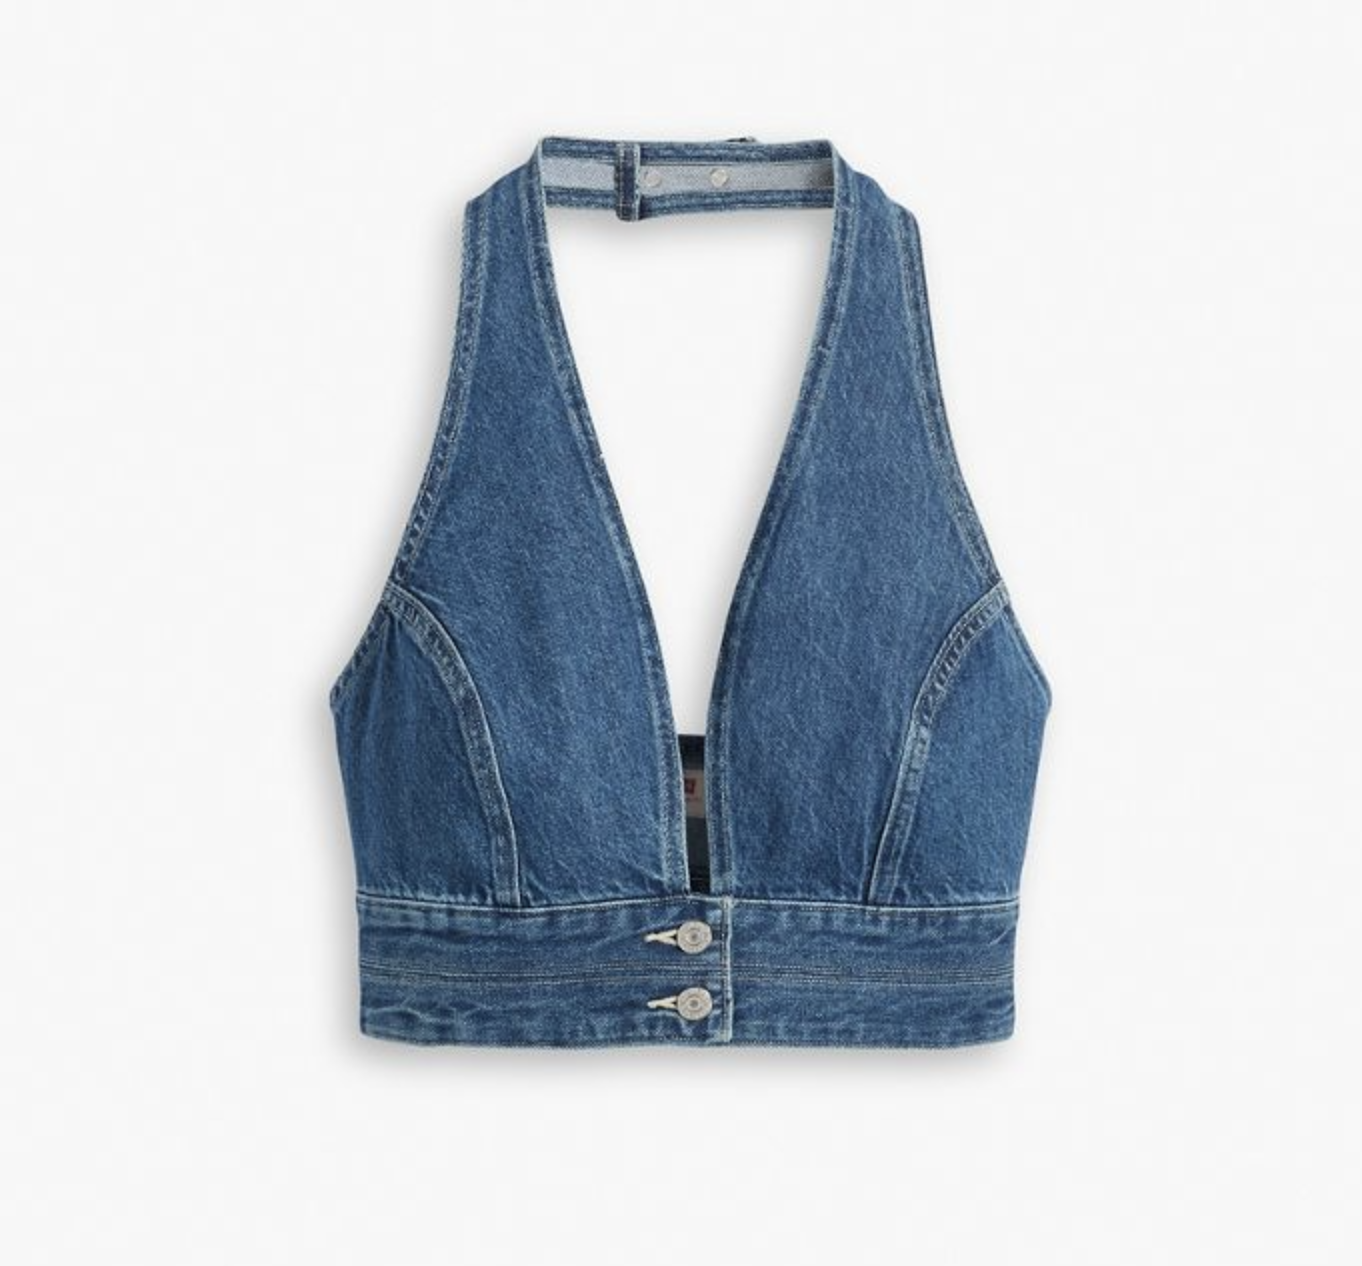 How to Rock a Denim Crop Top: Style Tips
and Outfit Ideas